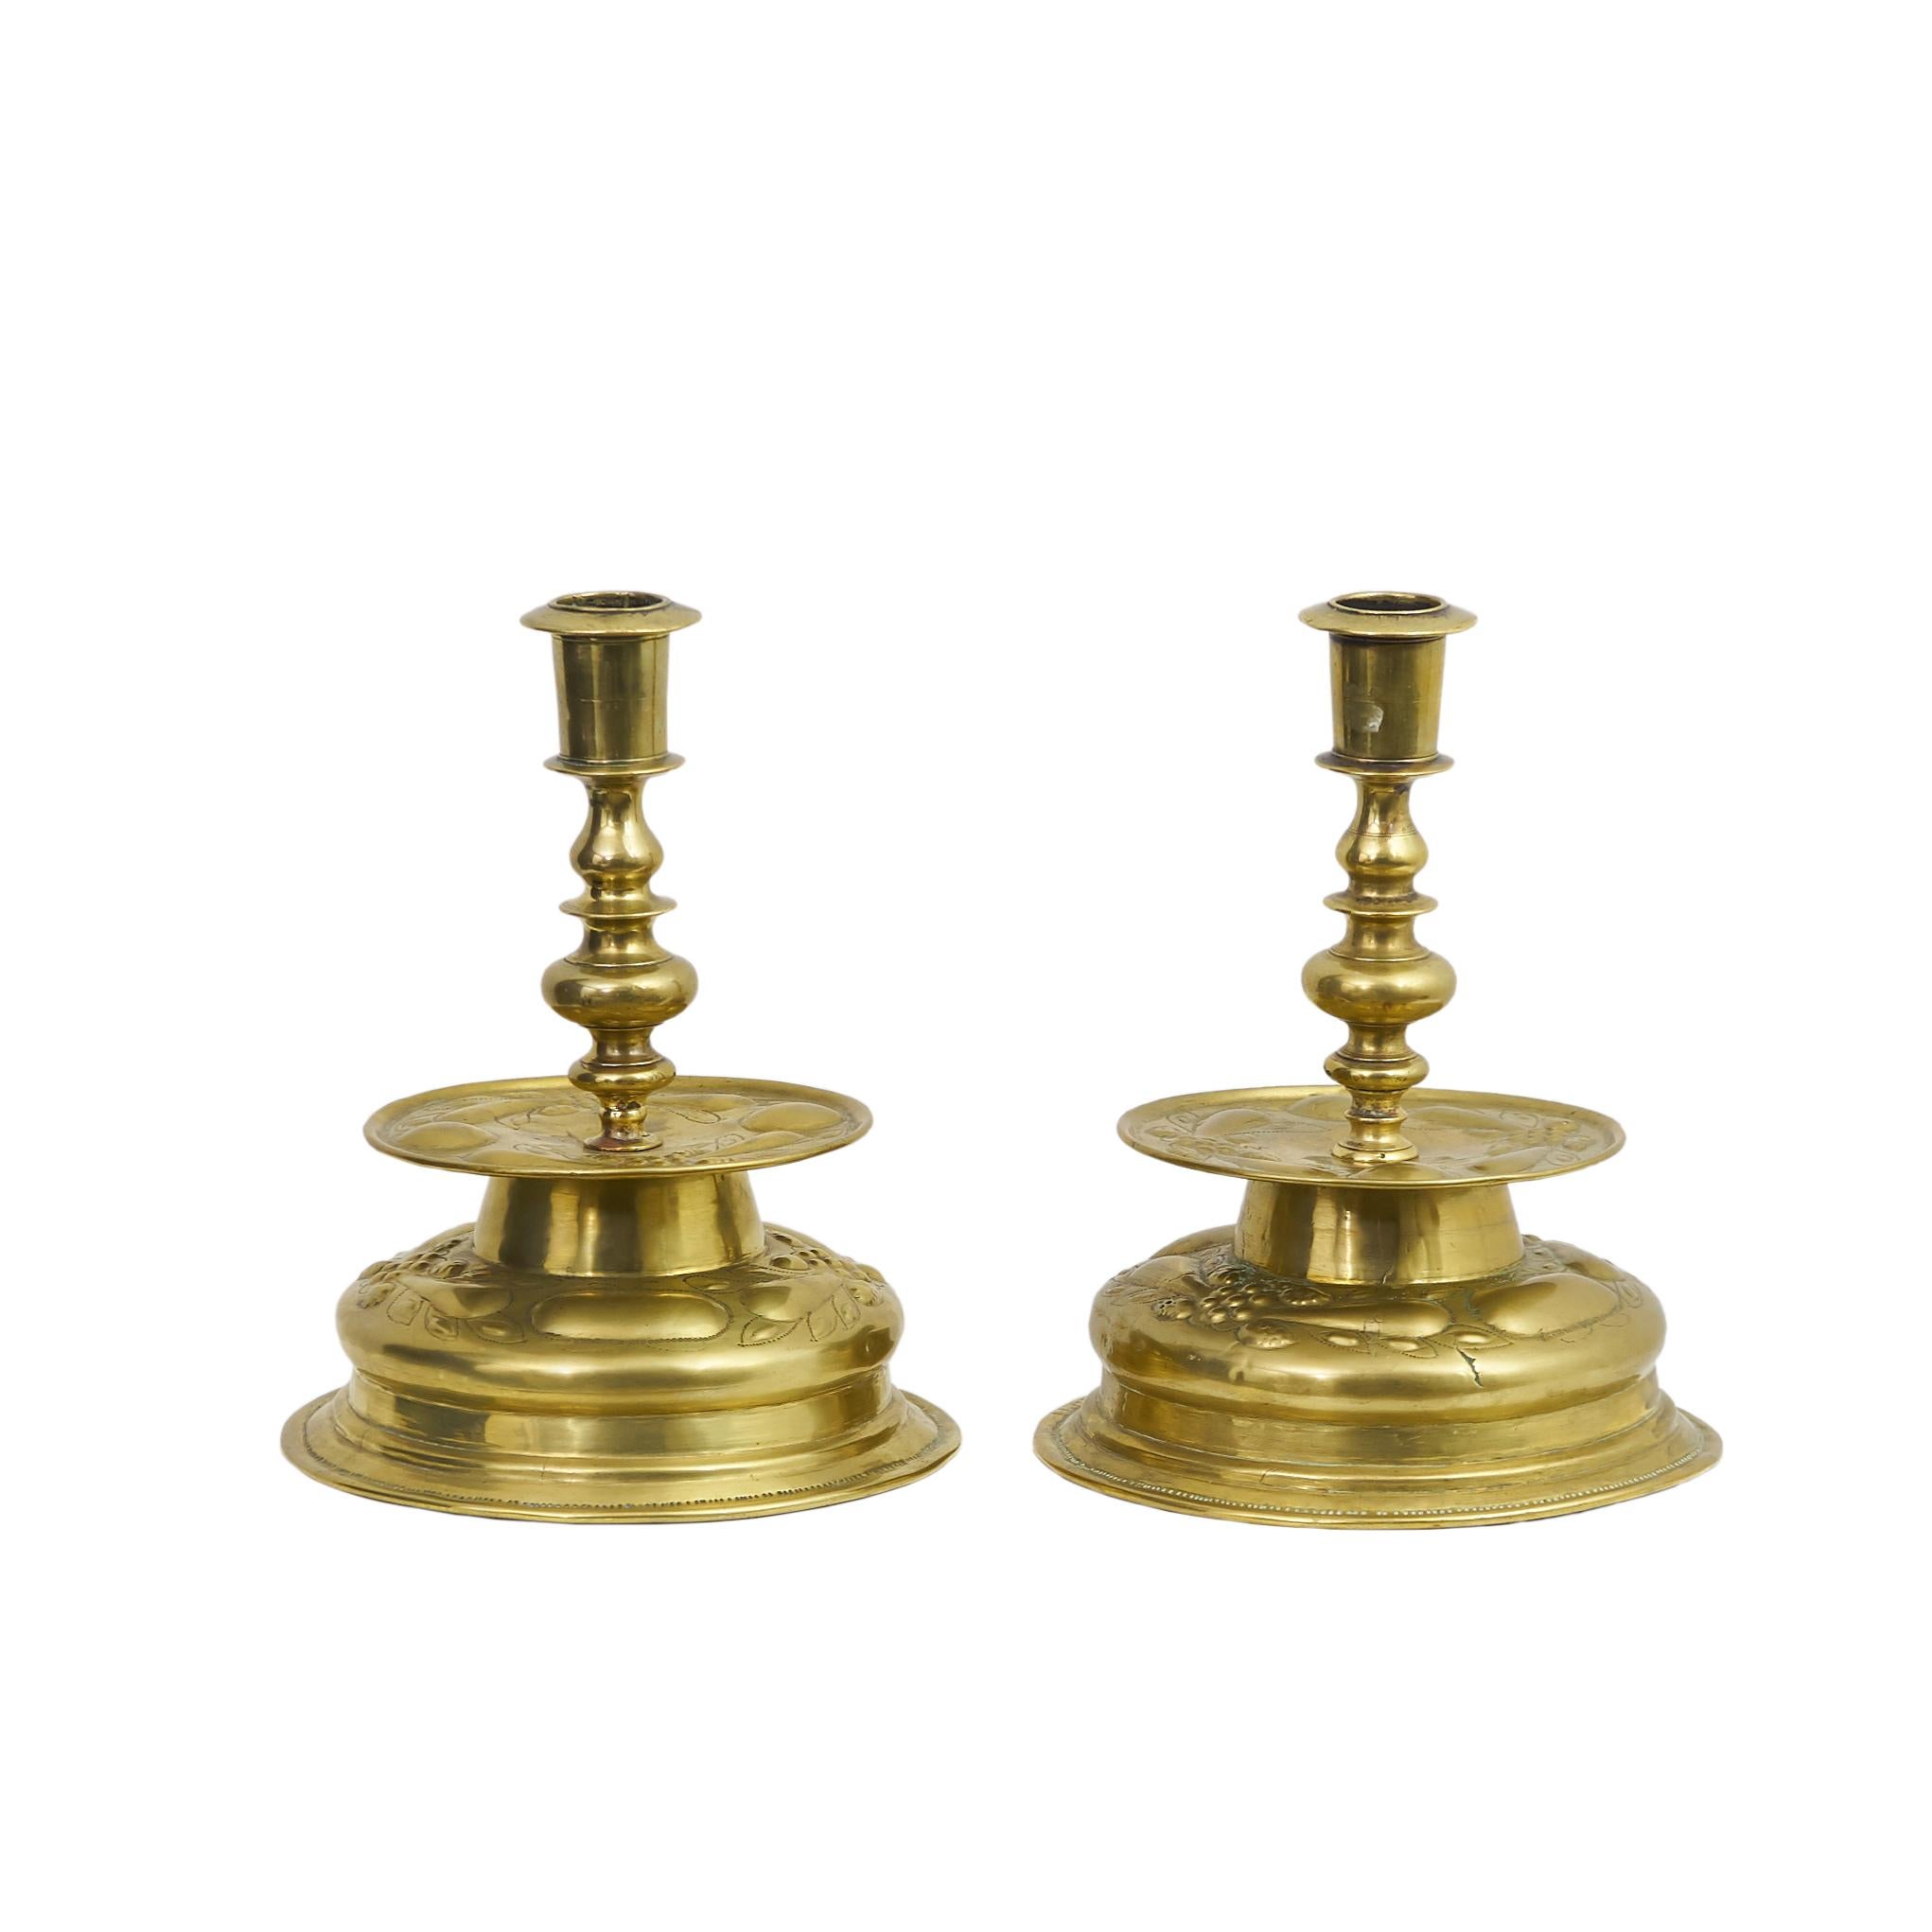 Pair of Scandinavian Mid-17th Century Candlesticks For Sale